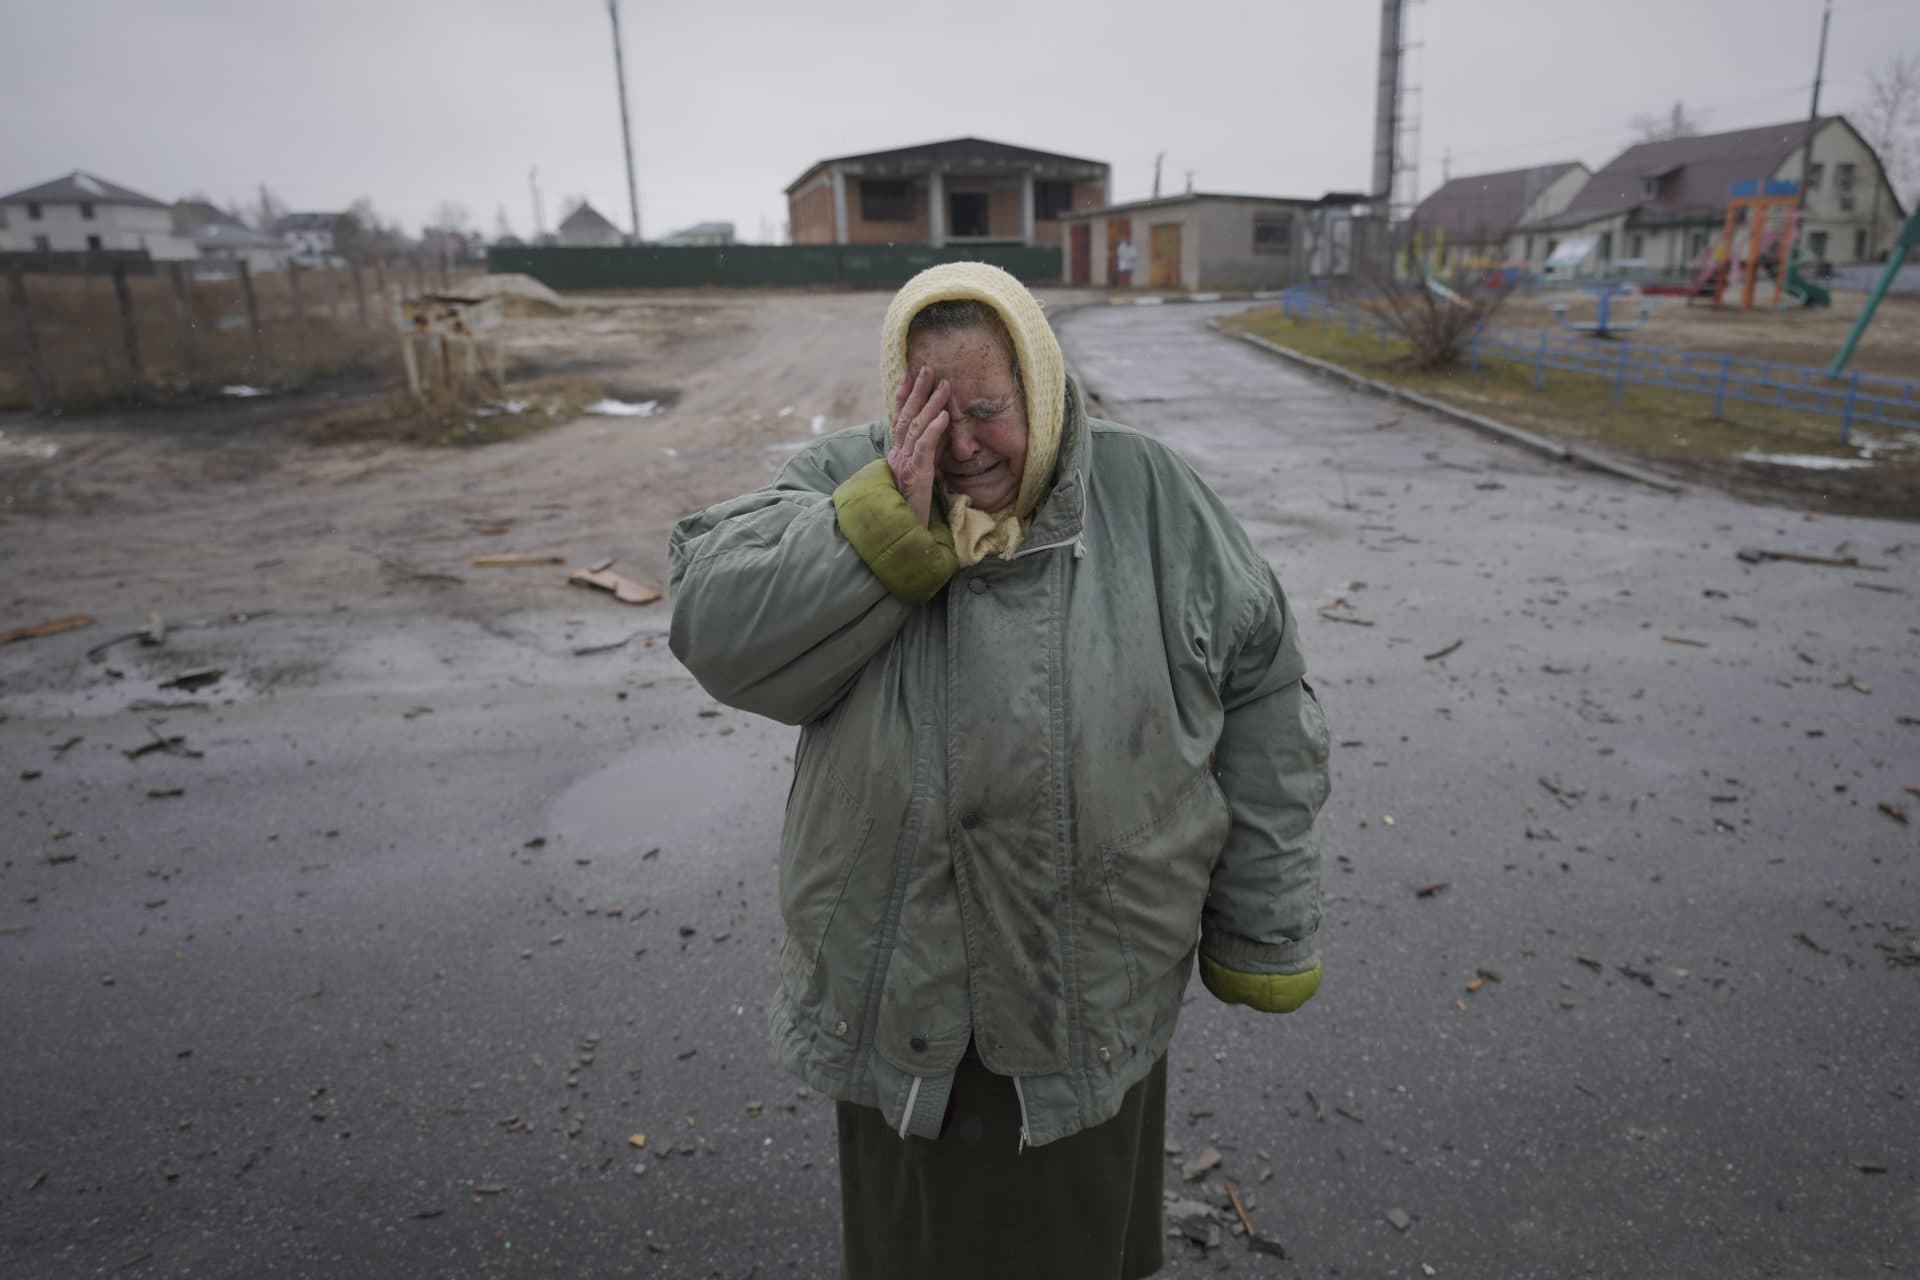 A woman cries outside houses damaged by a Russian airstrike, according to locals, in Gorenka, outside the capital Kyiv, Ukraine, March 2. (Vadim Ghirda/AP)